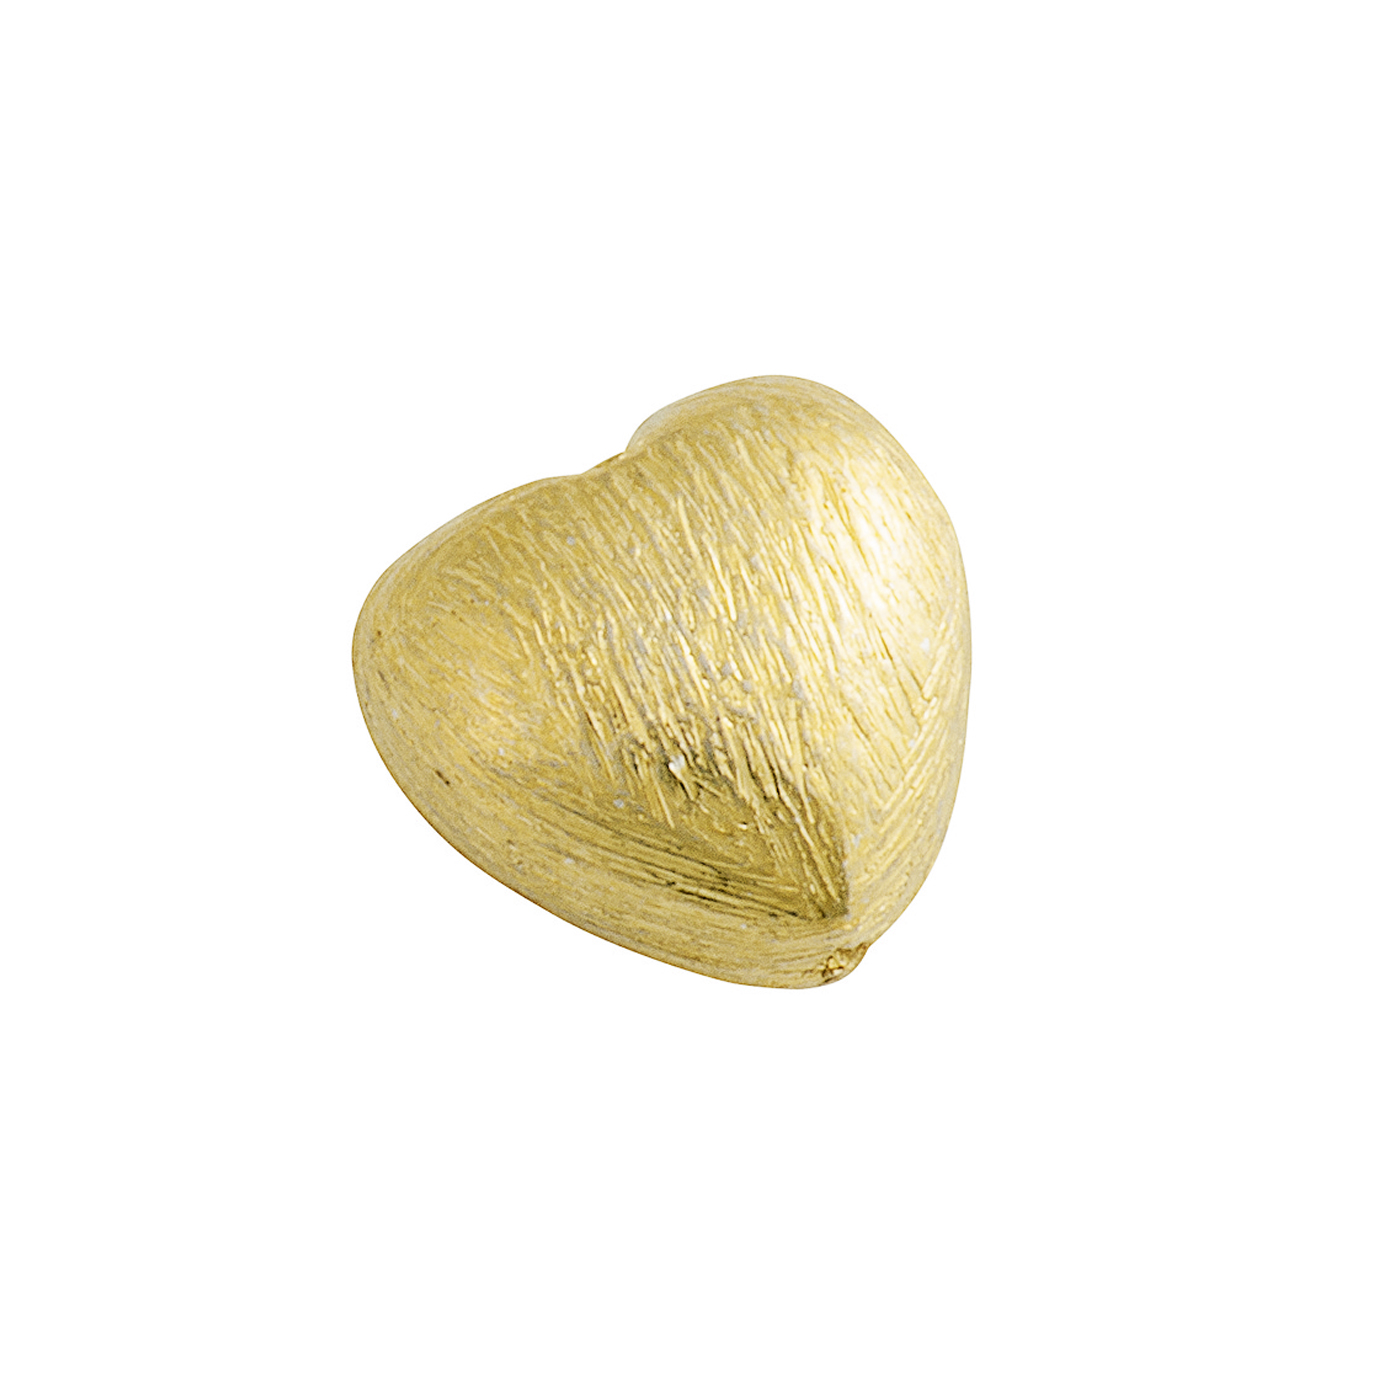 Interm. Piece, Heart, 925Ag Gold-Pl., 10x7 mm, Tarnished - 1 piece